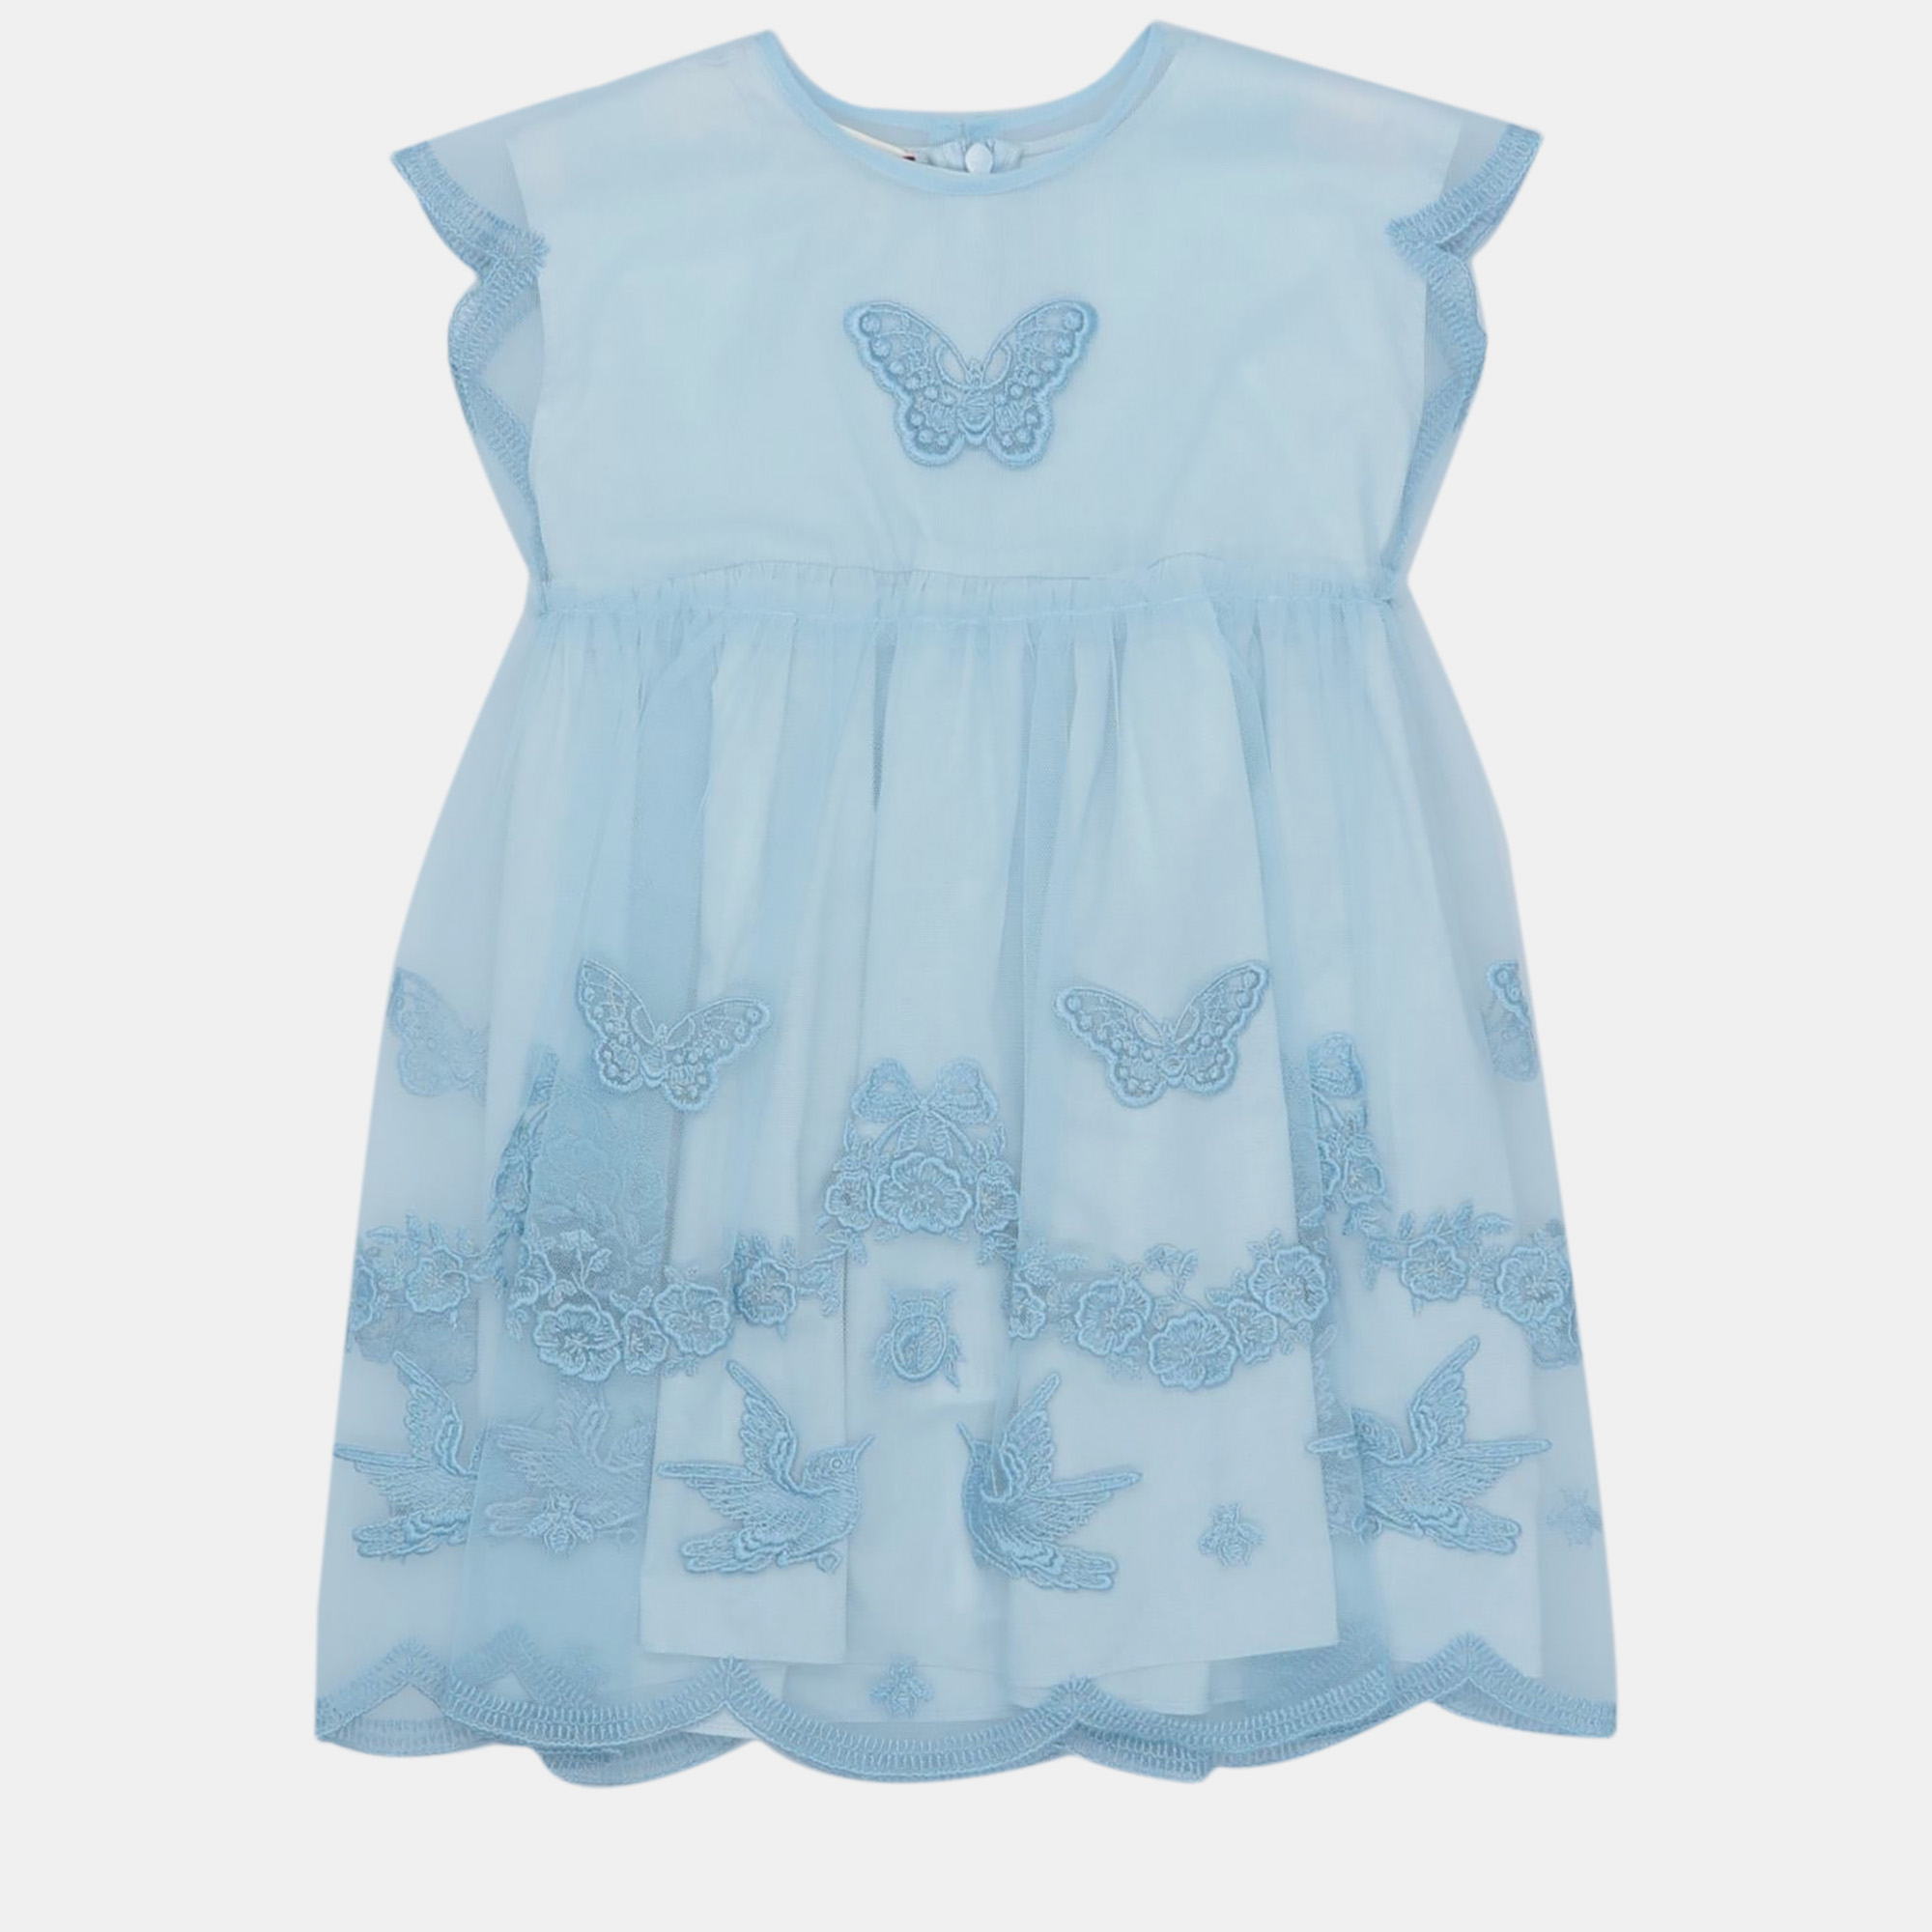 Gucci blue embroidered tulle dress size 36m